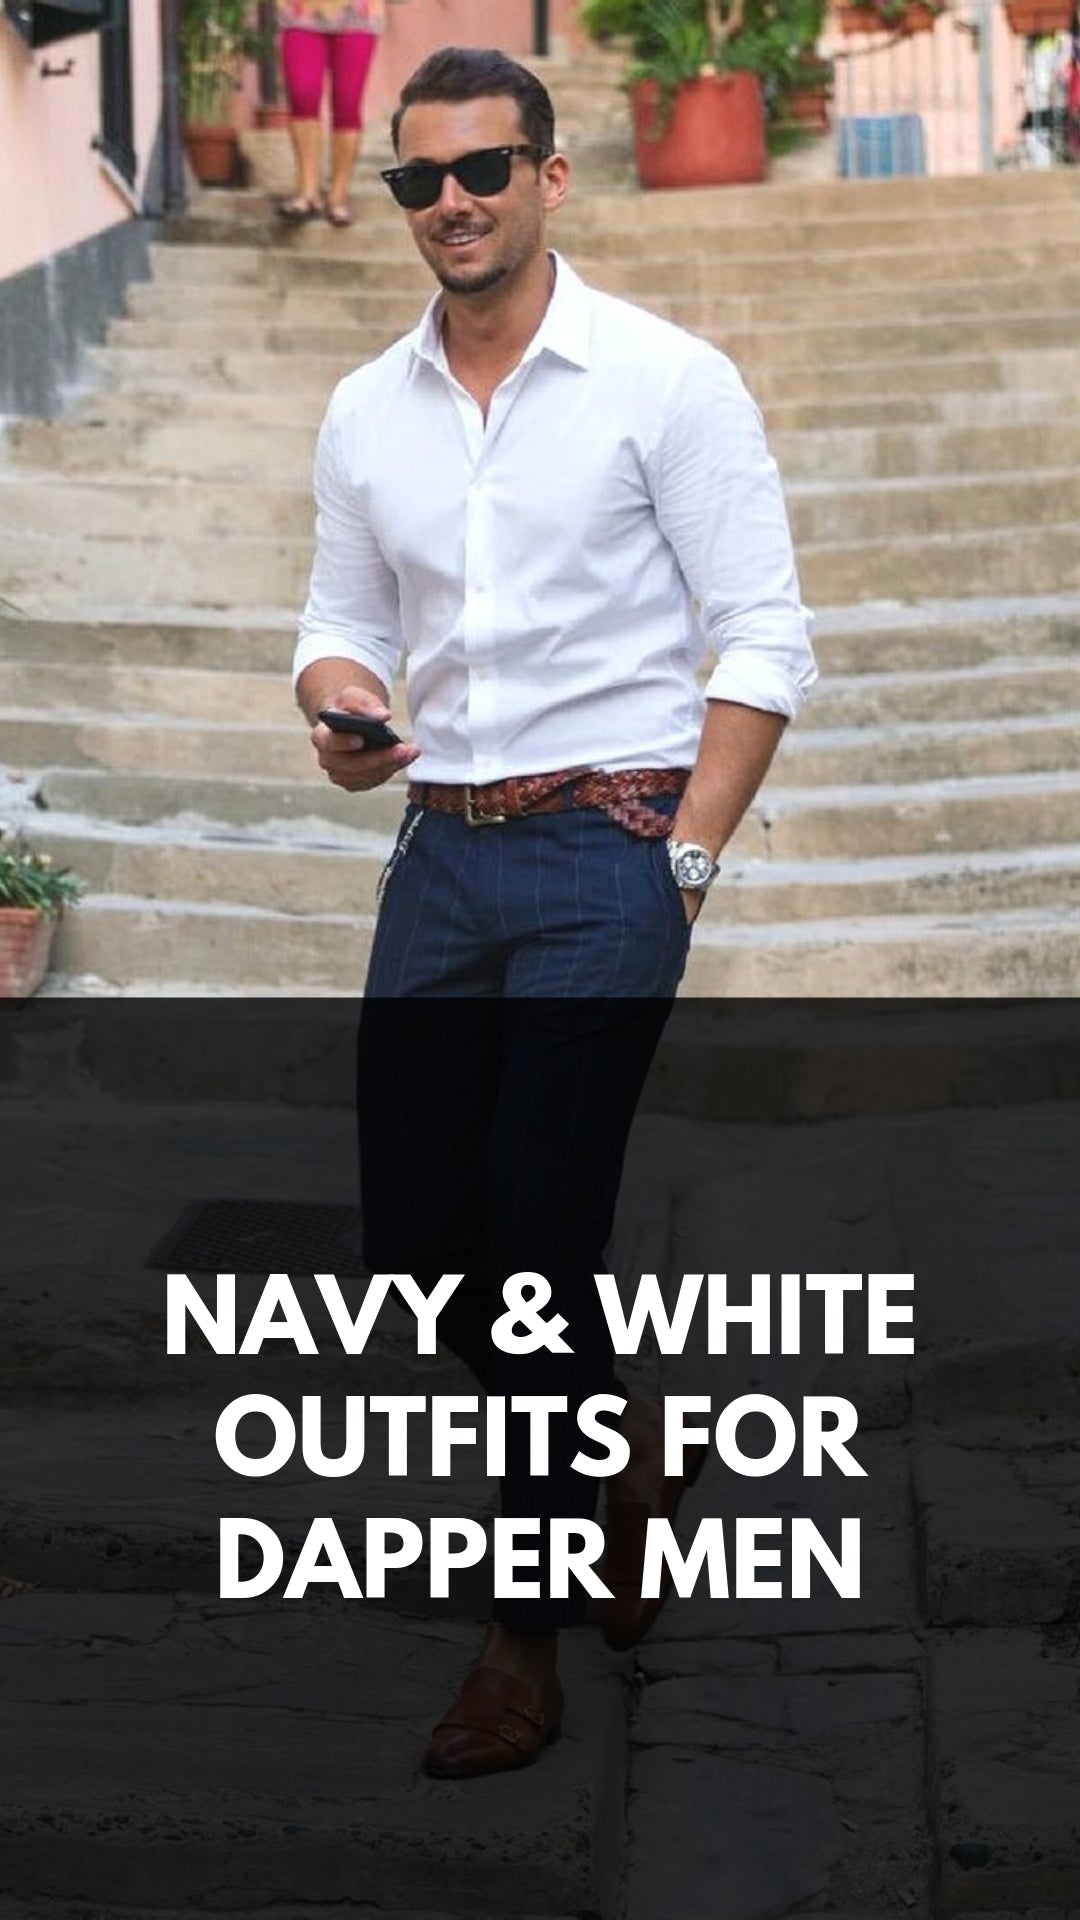 NAVY & WHITE OUTFIT INSPIRATION FOR MEN